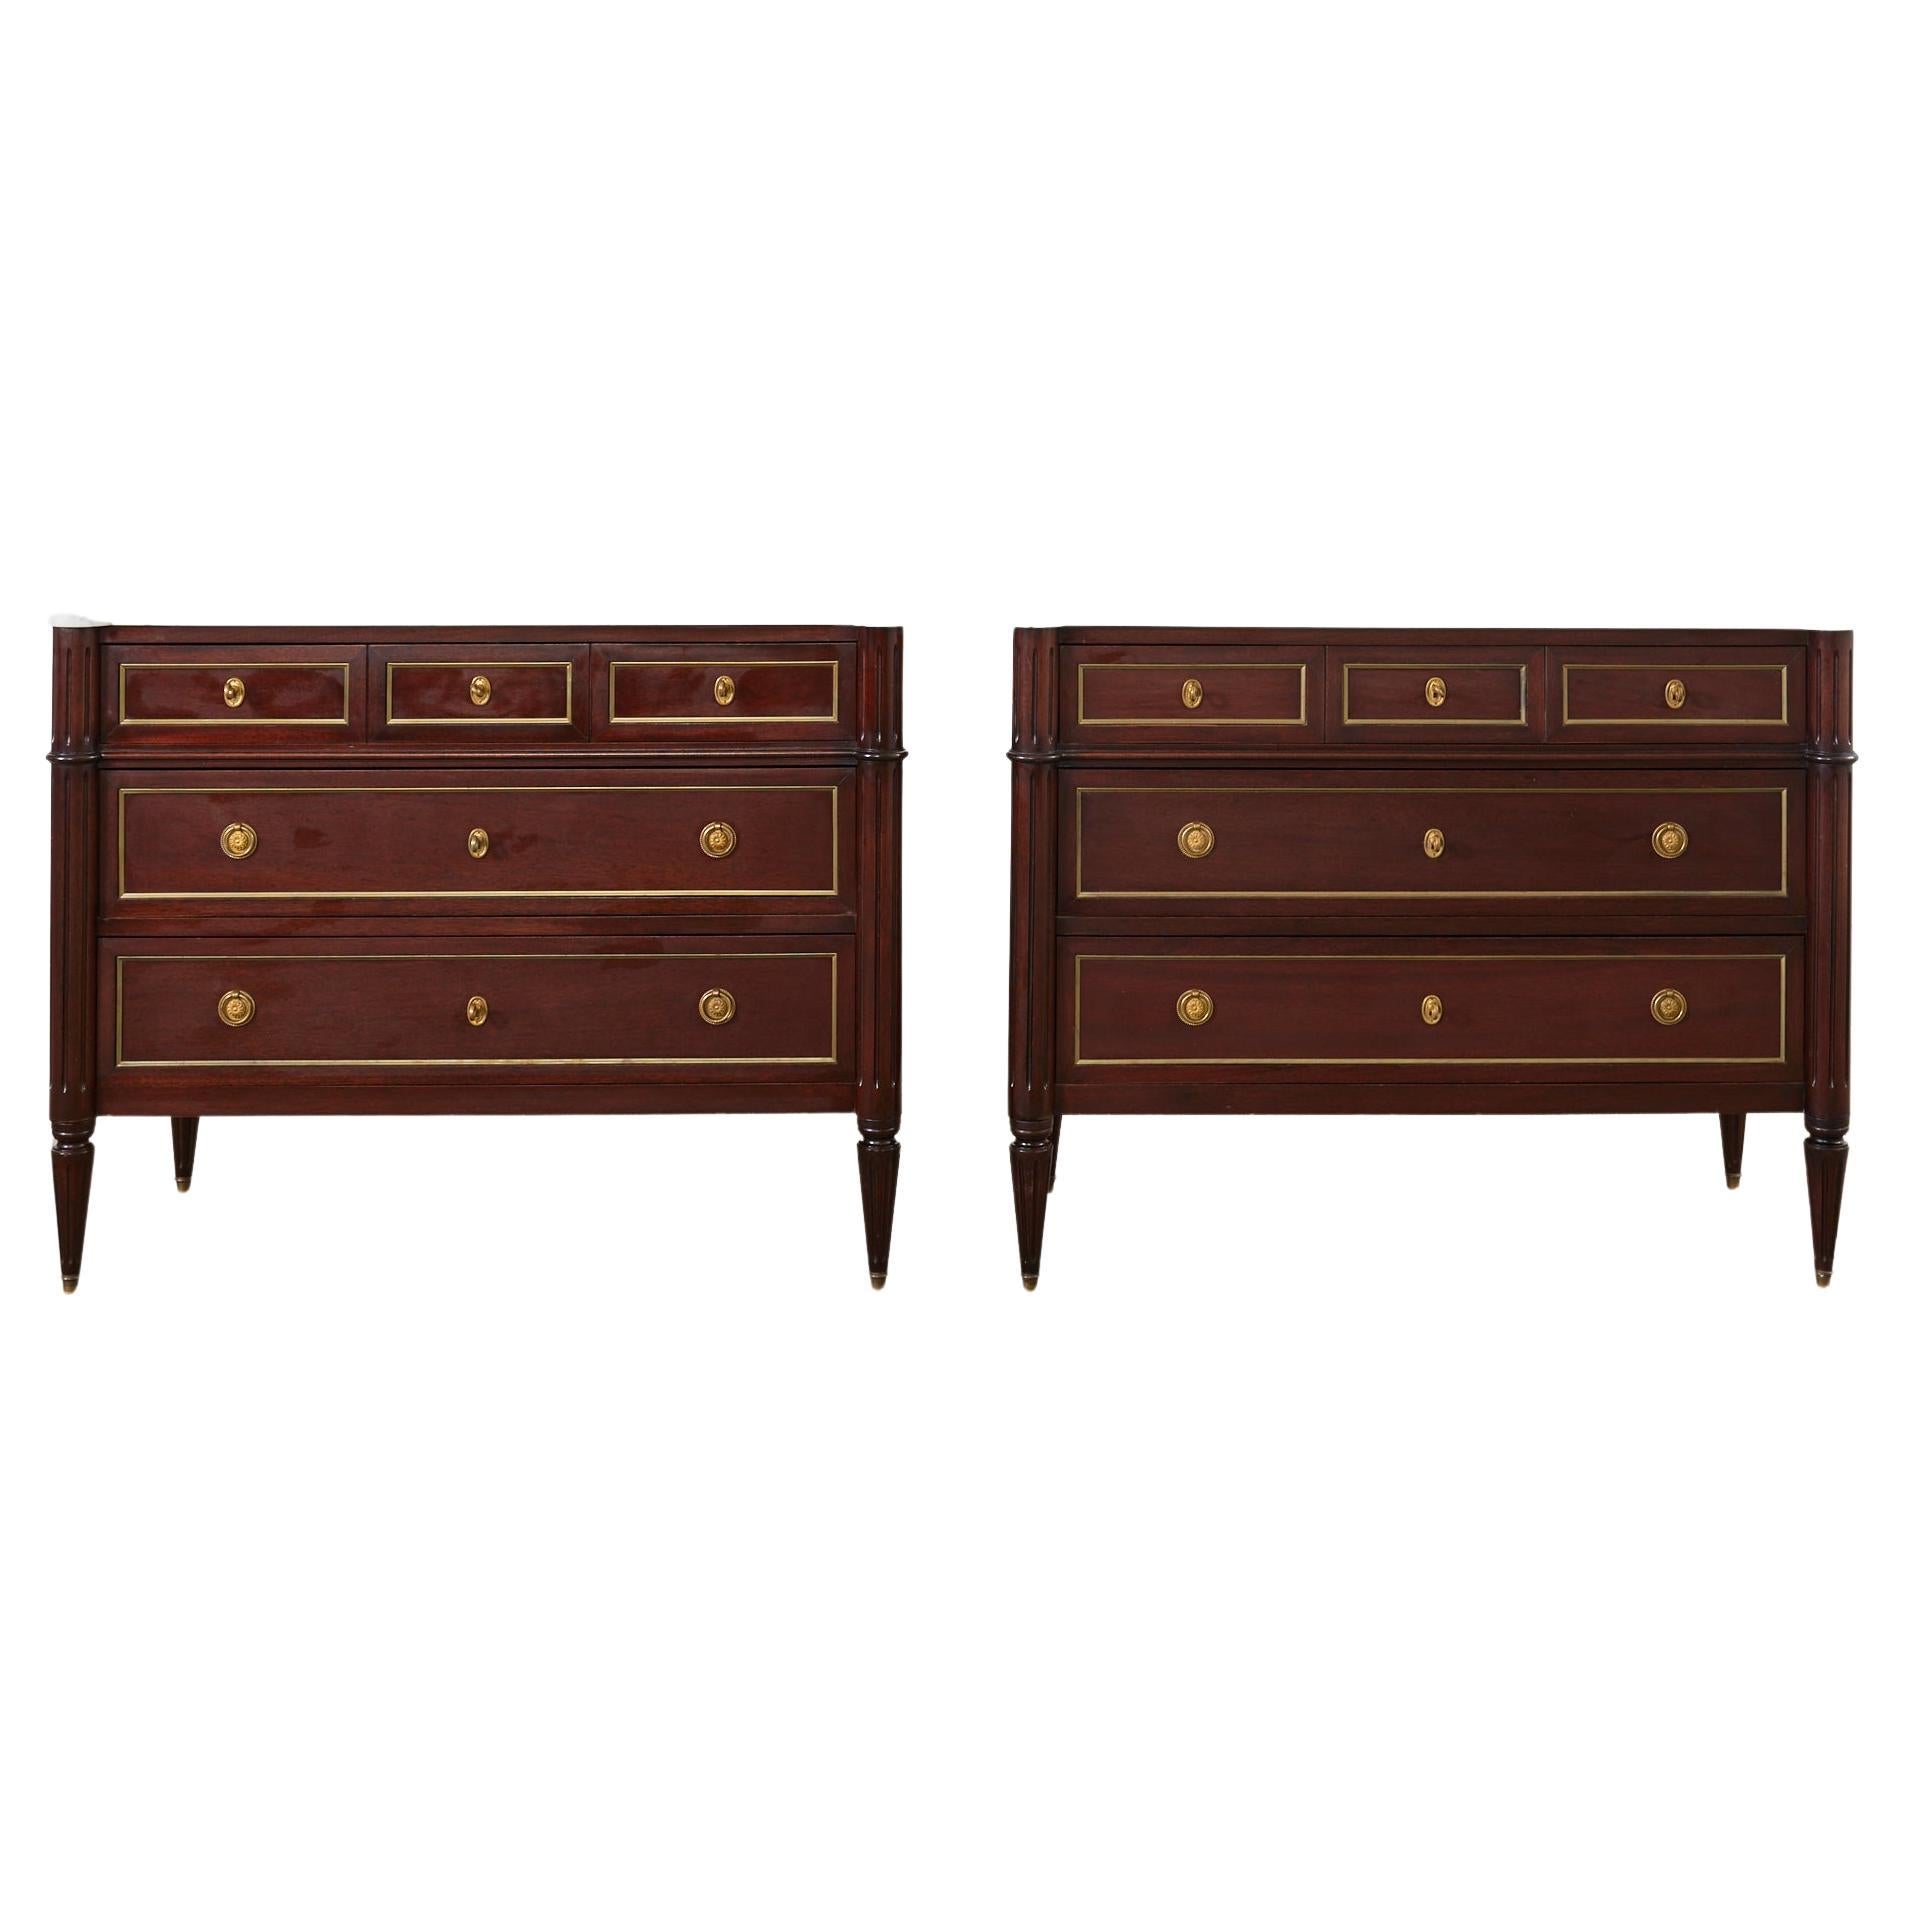 Pair of Louis XVI Style Marble Top Mahogany Commode Dressers For Sale